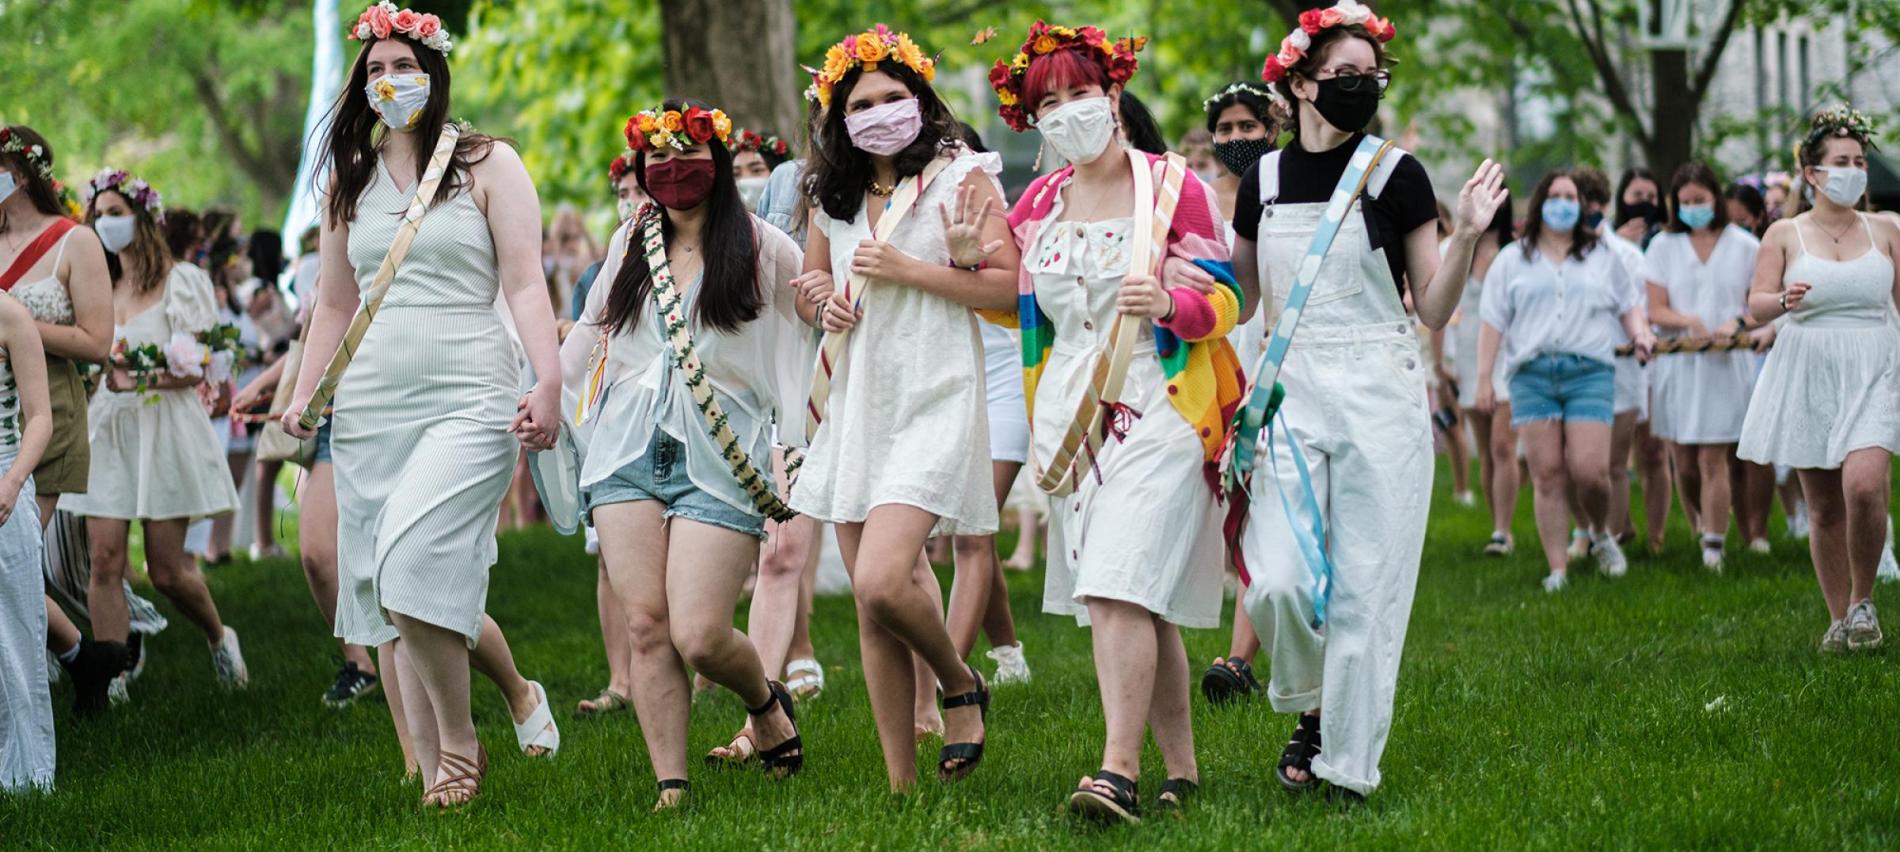 Students celebrate May Day 2021 around the May Pole